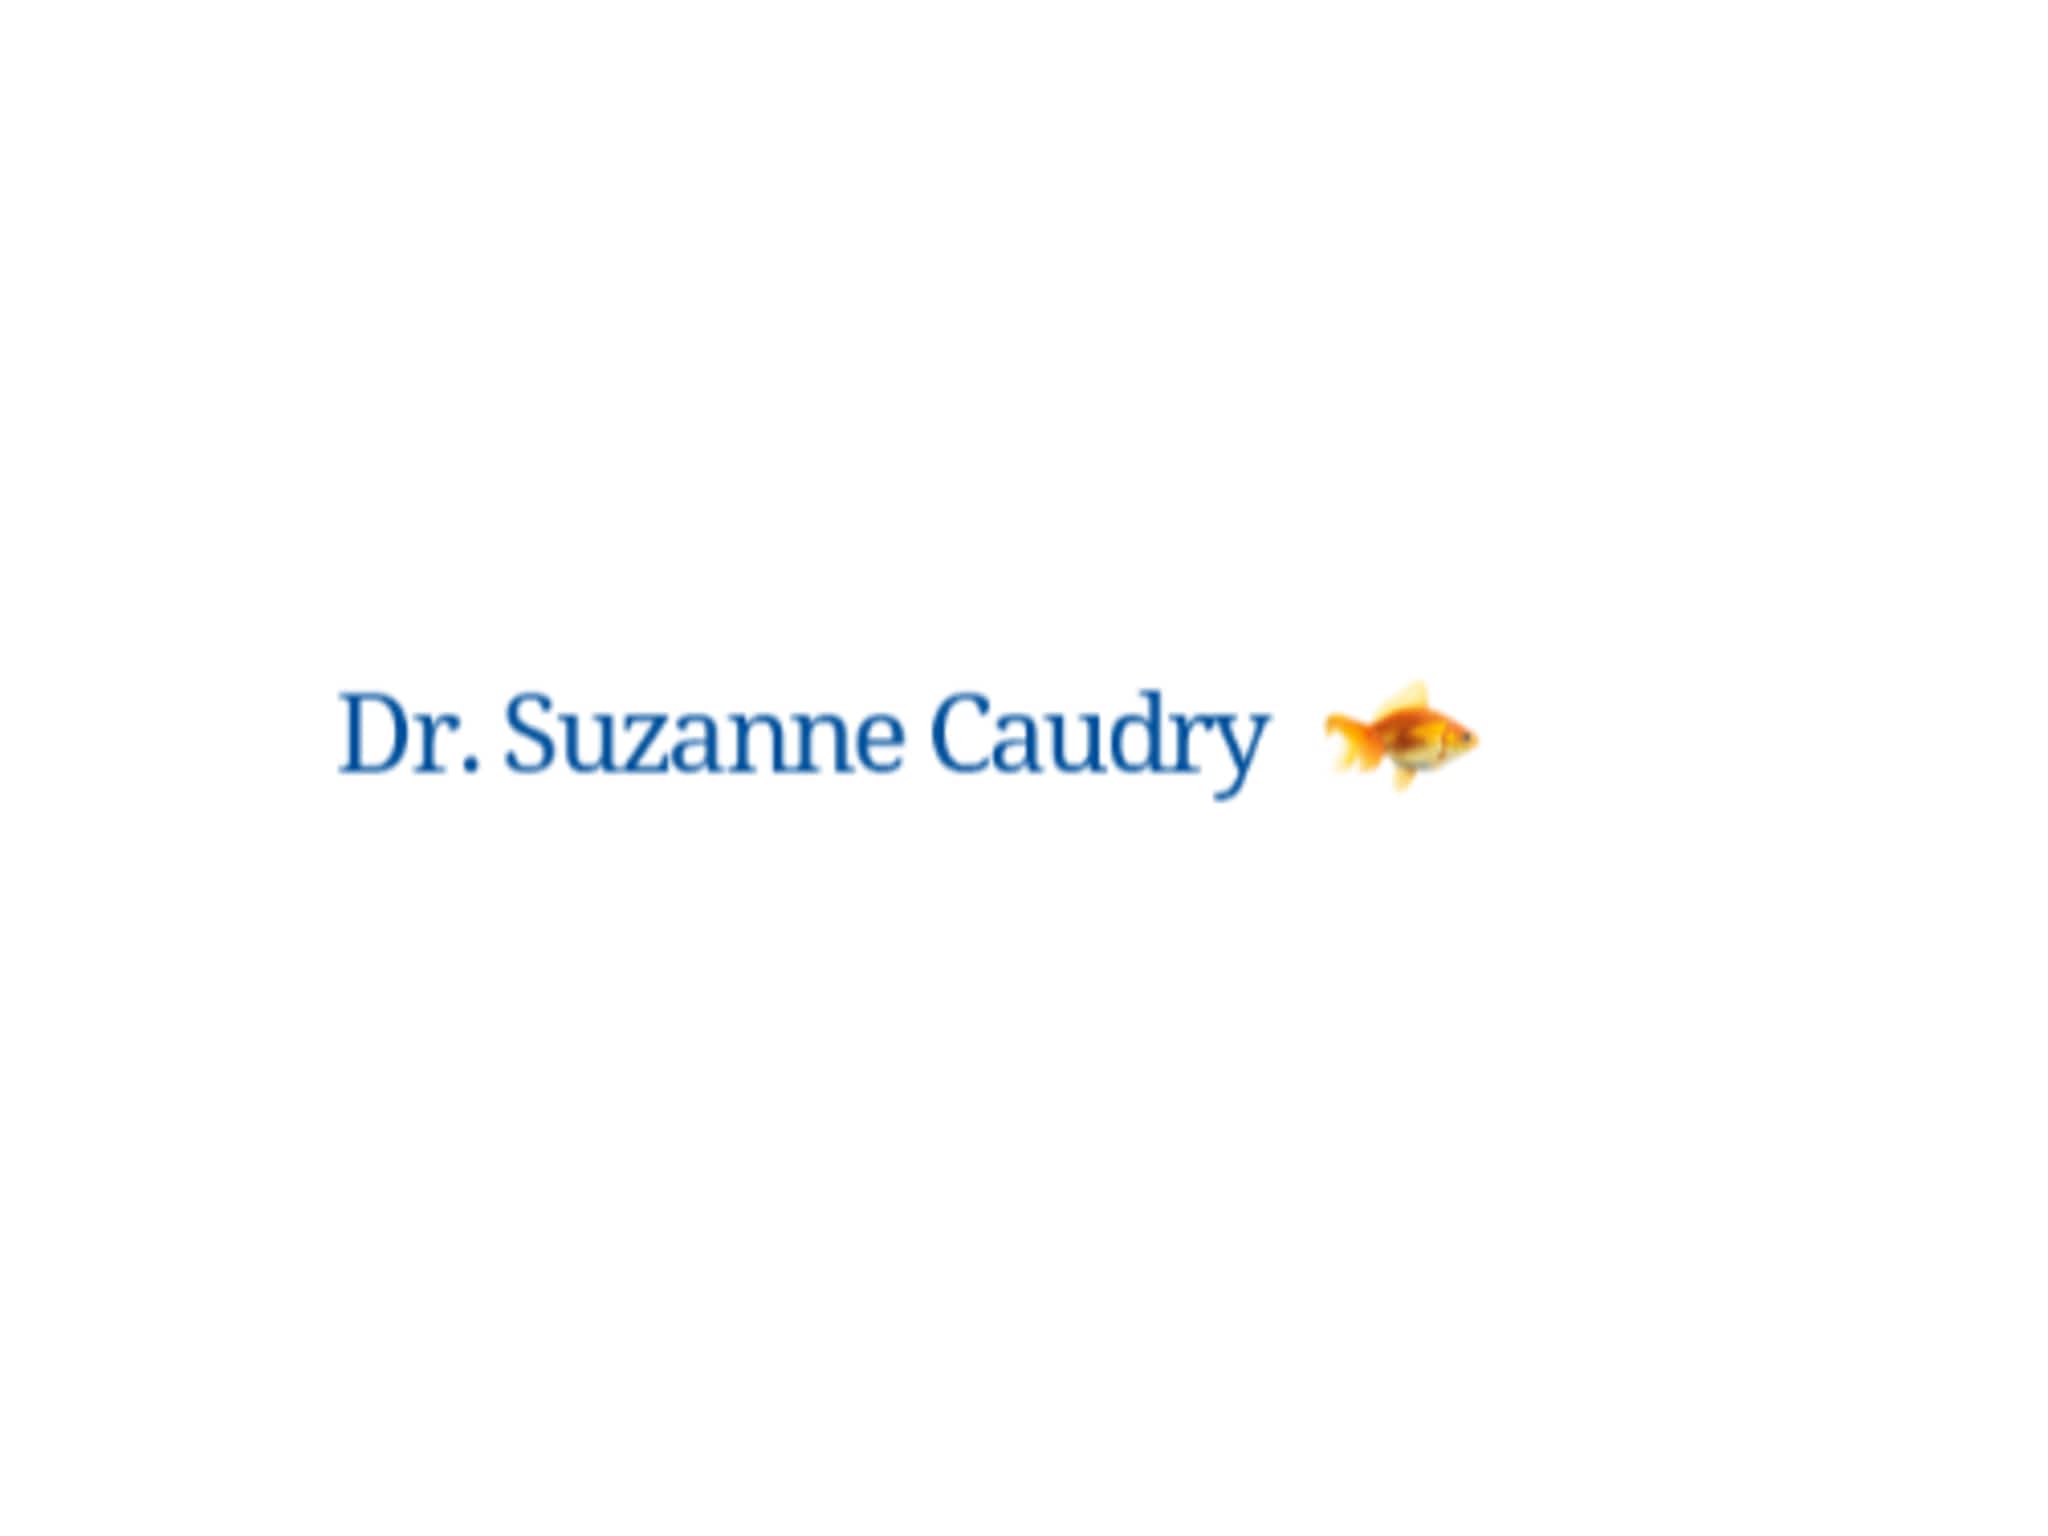 photo Dr. Suzanne Caudry